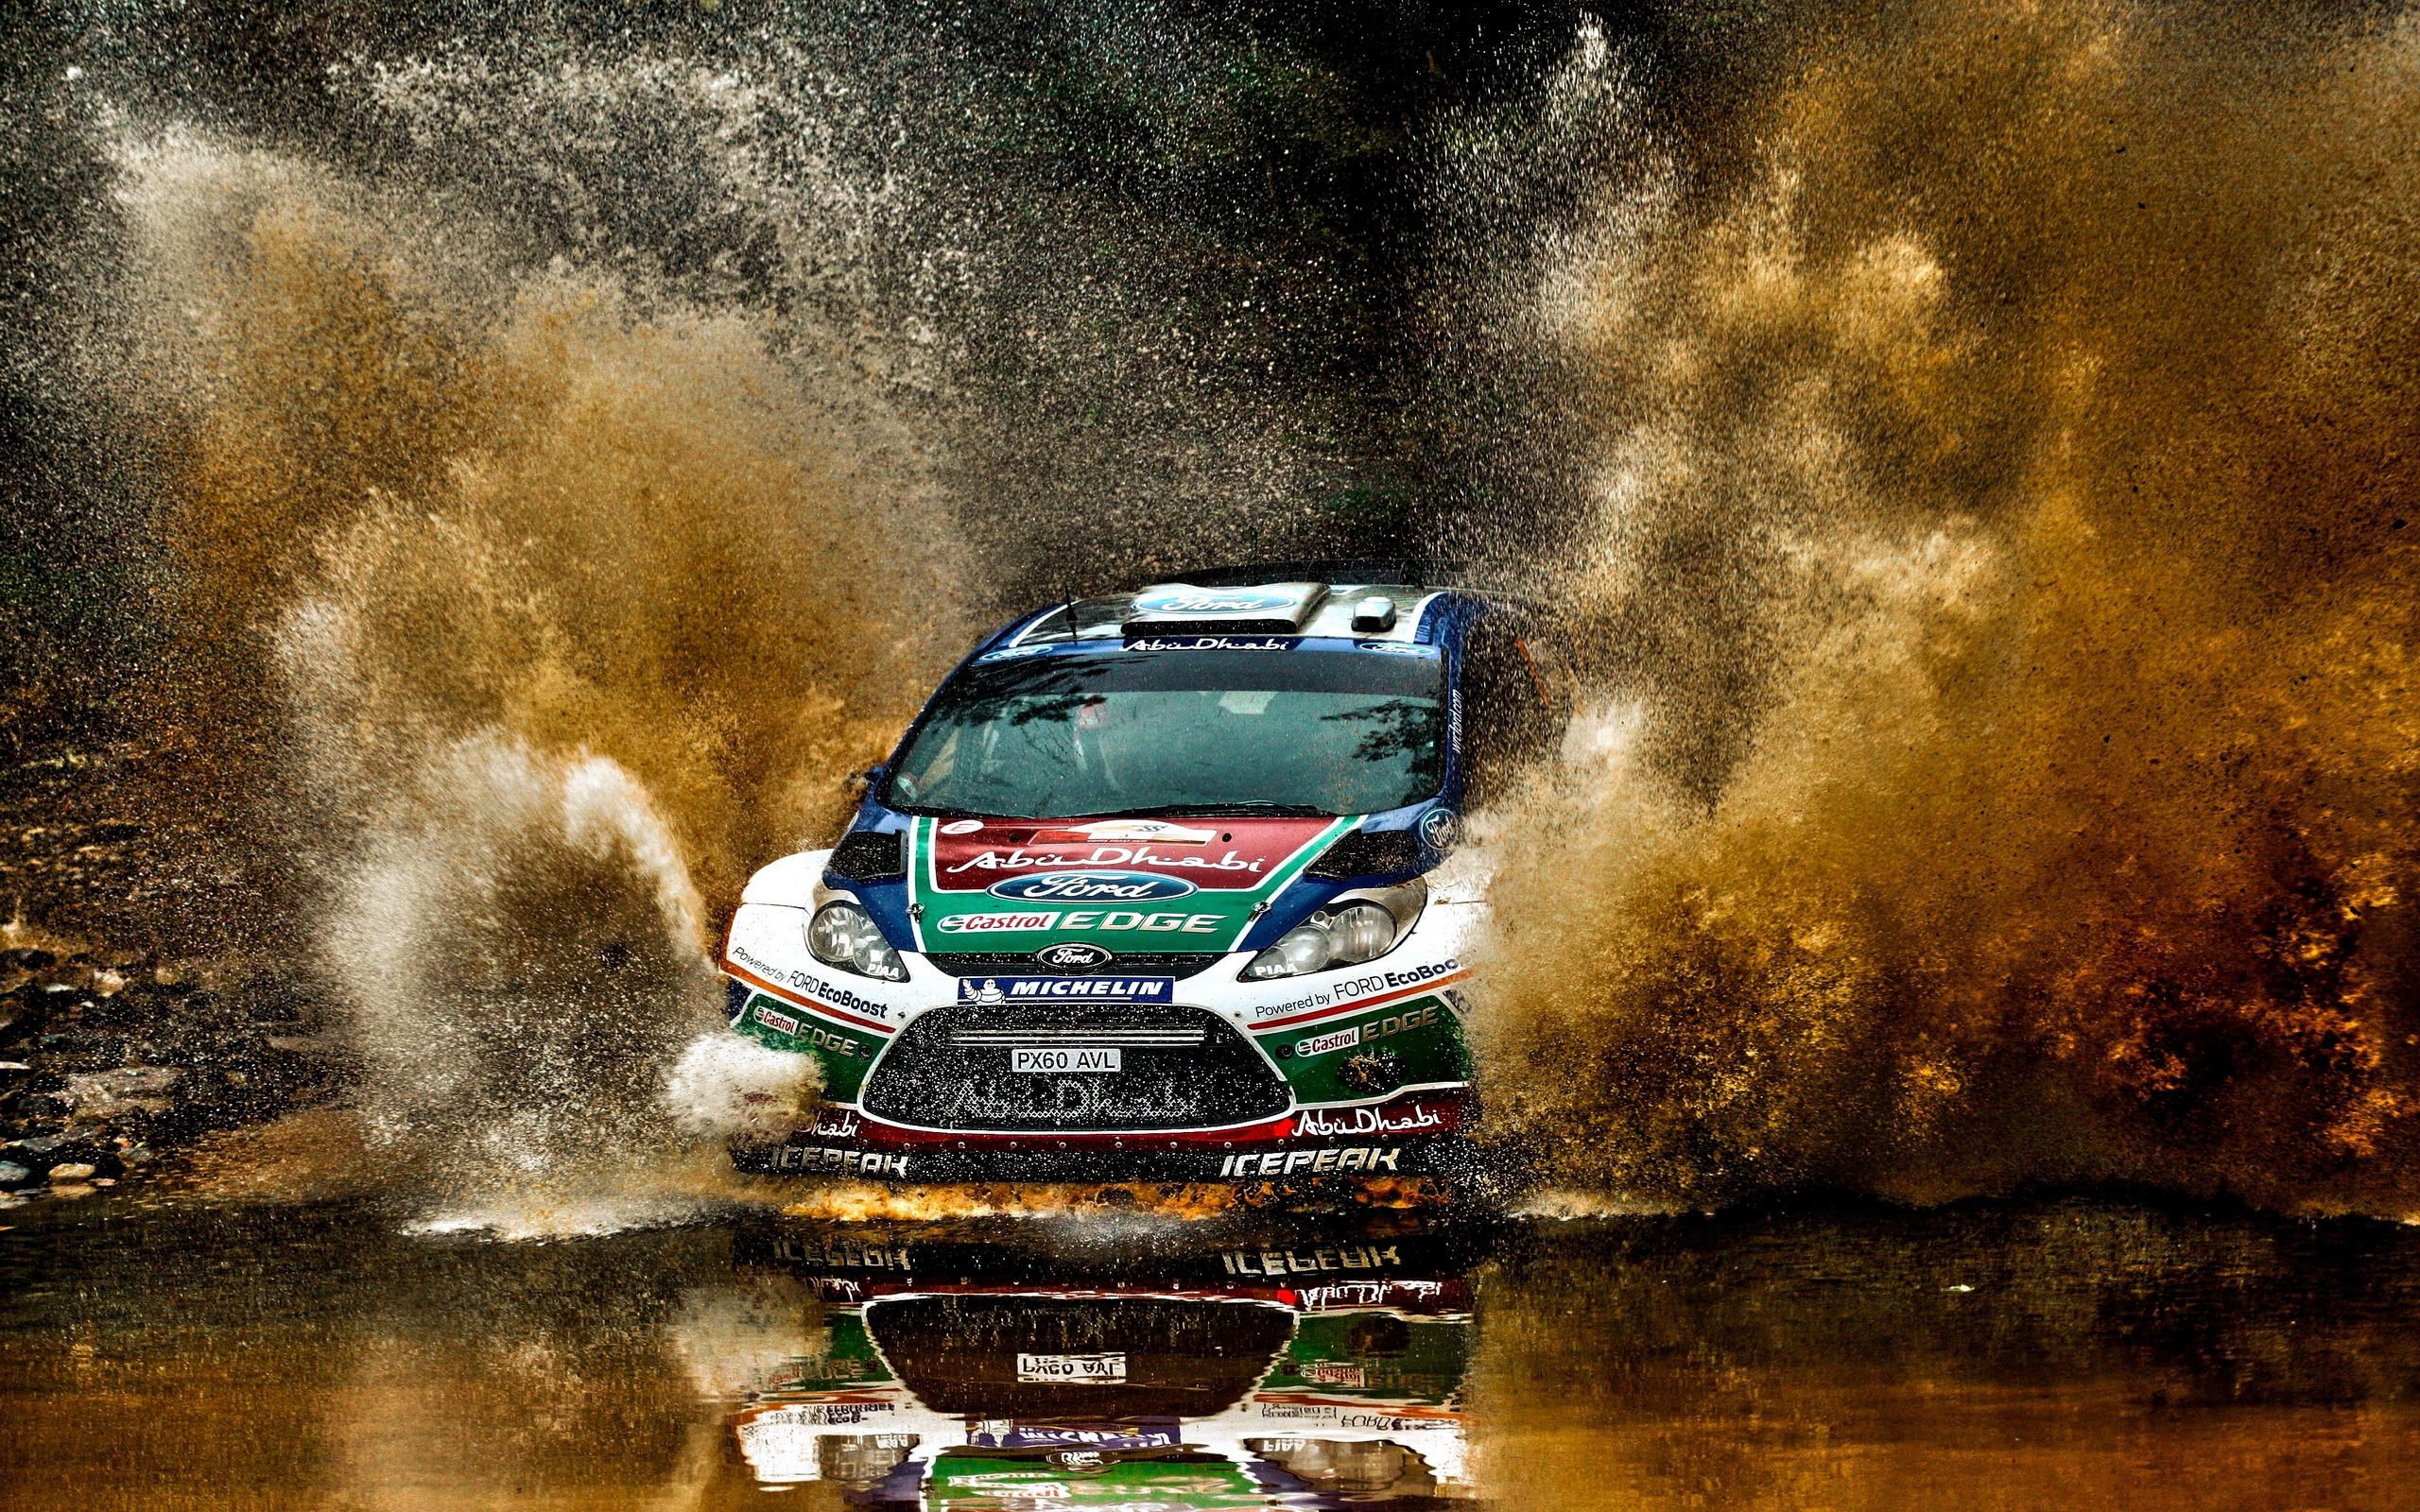 Rally Cars Res: 2560x1600 / Size:2311kb. Views: 32786